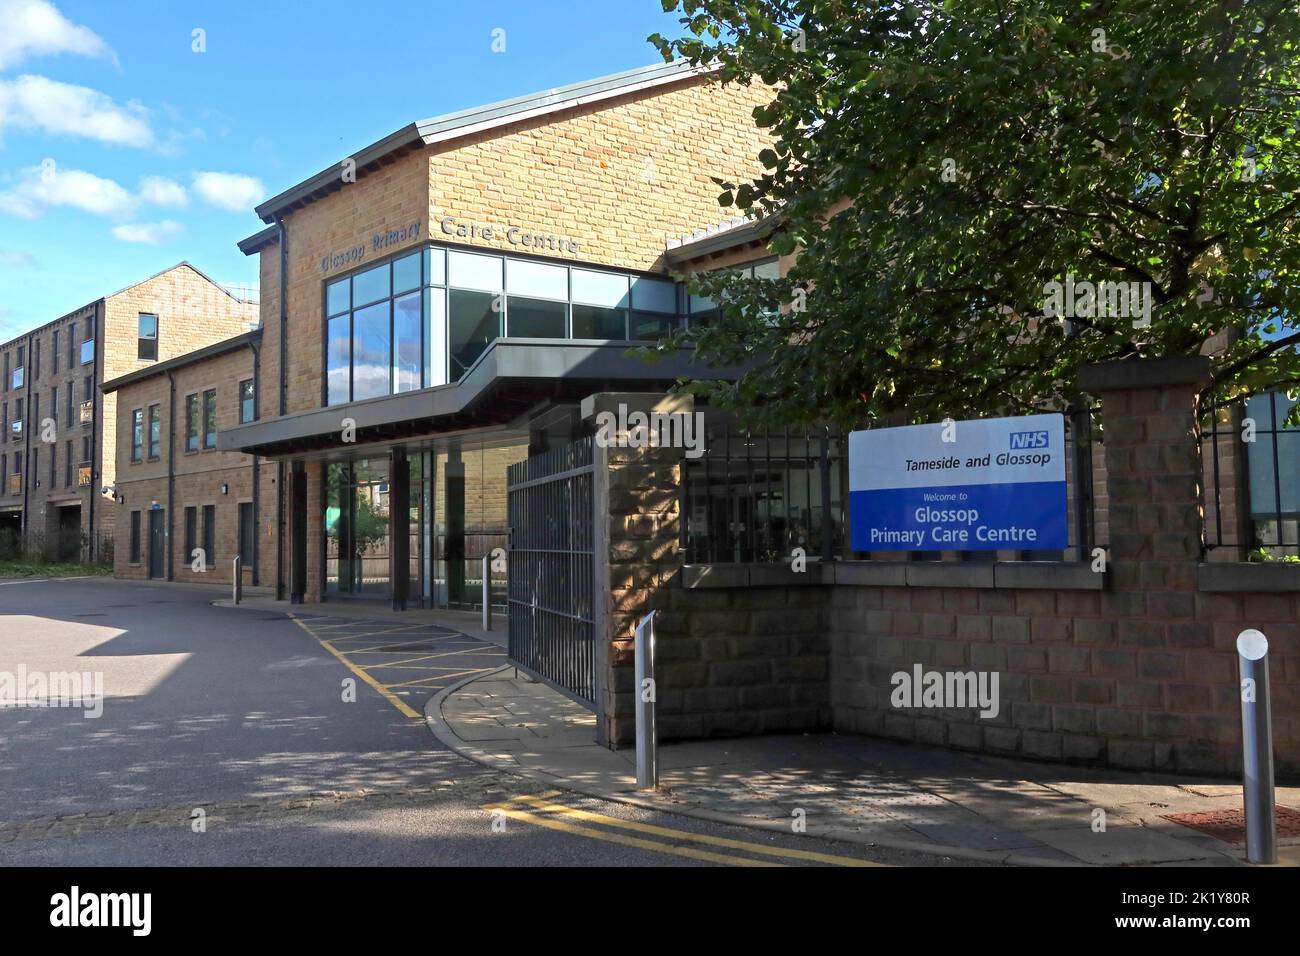 NHS Tameside and Glossop, Primary Care Centre, foundation trust, George Street, Glossop, High Peak, Derbyshire, England, UK, SK13 8AY Stock Photo